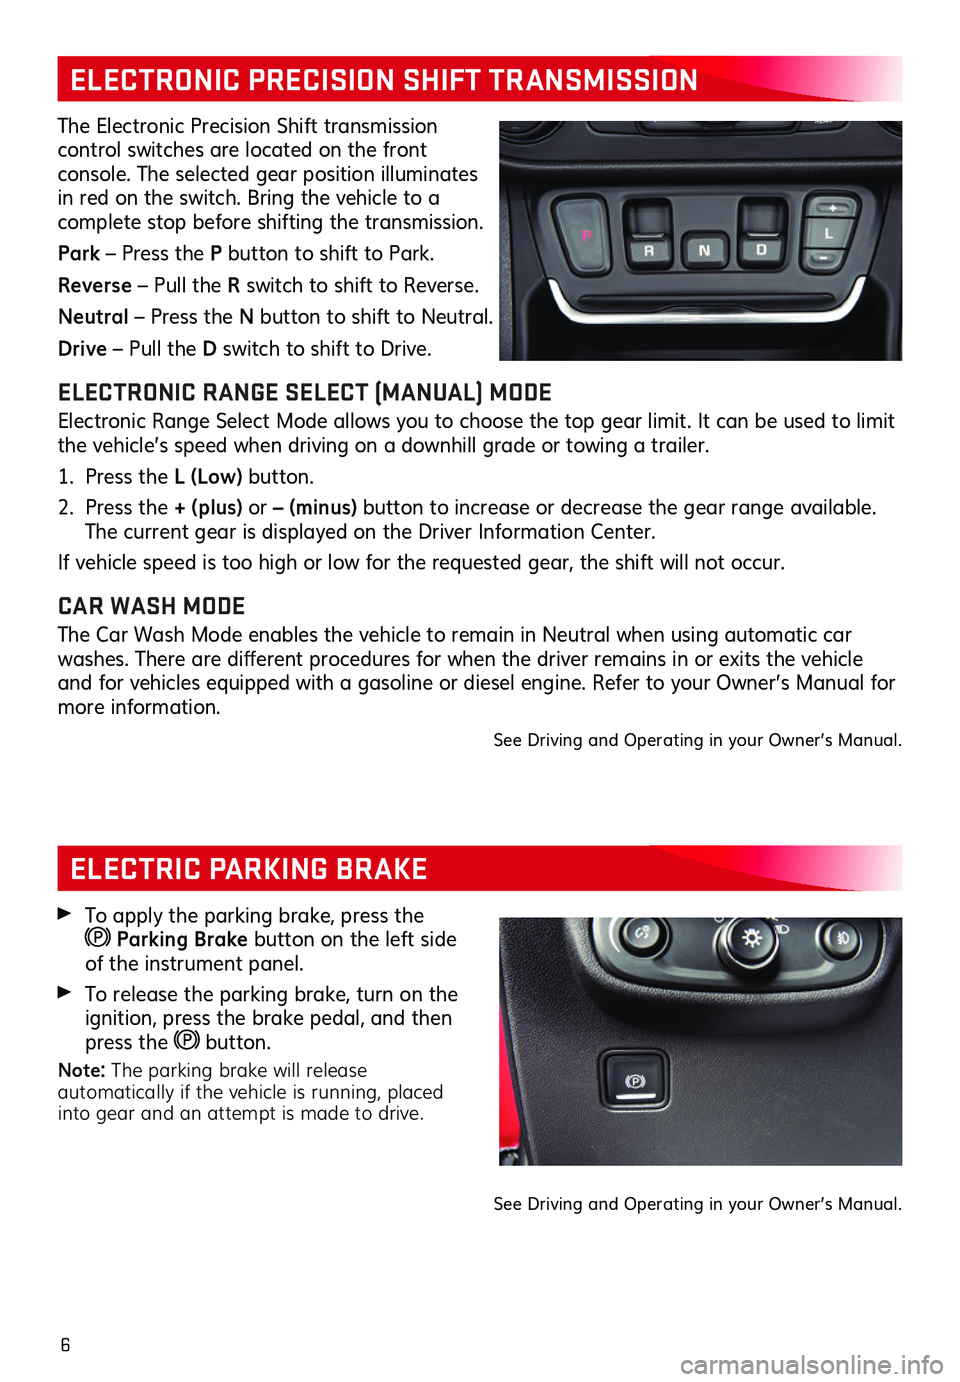 GMC TERRAIN 2020  Get To Know Guide 6
ELECTRIC PARKING BRAKE
ELECTRONIC PRECISION SHIFT TRANSMISSION 
The Electronic Precision Shift transmission  
control switches are located on the front  
console. The selected gear position illumina